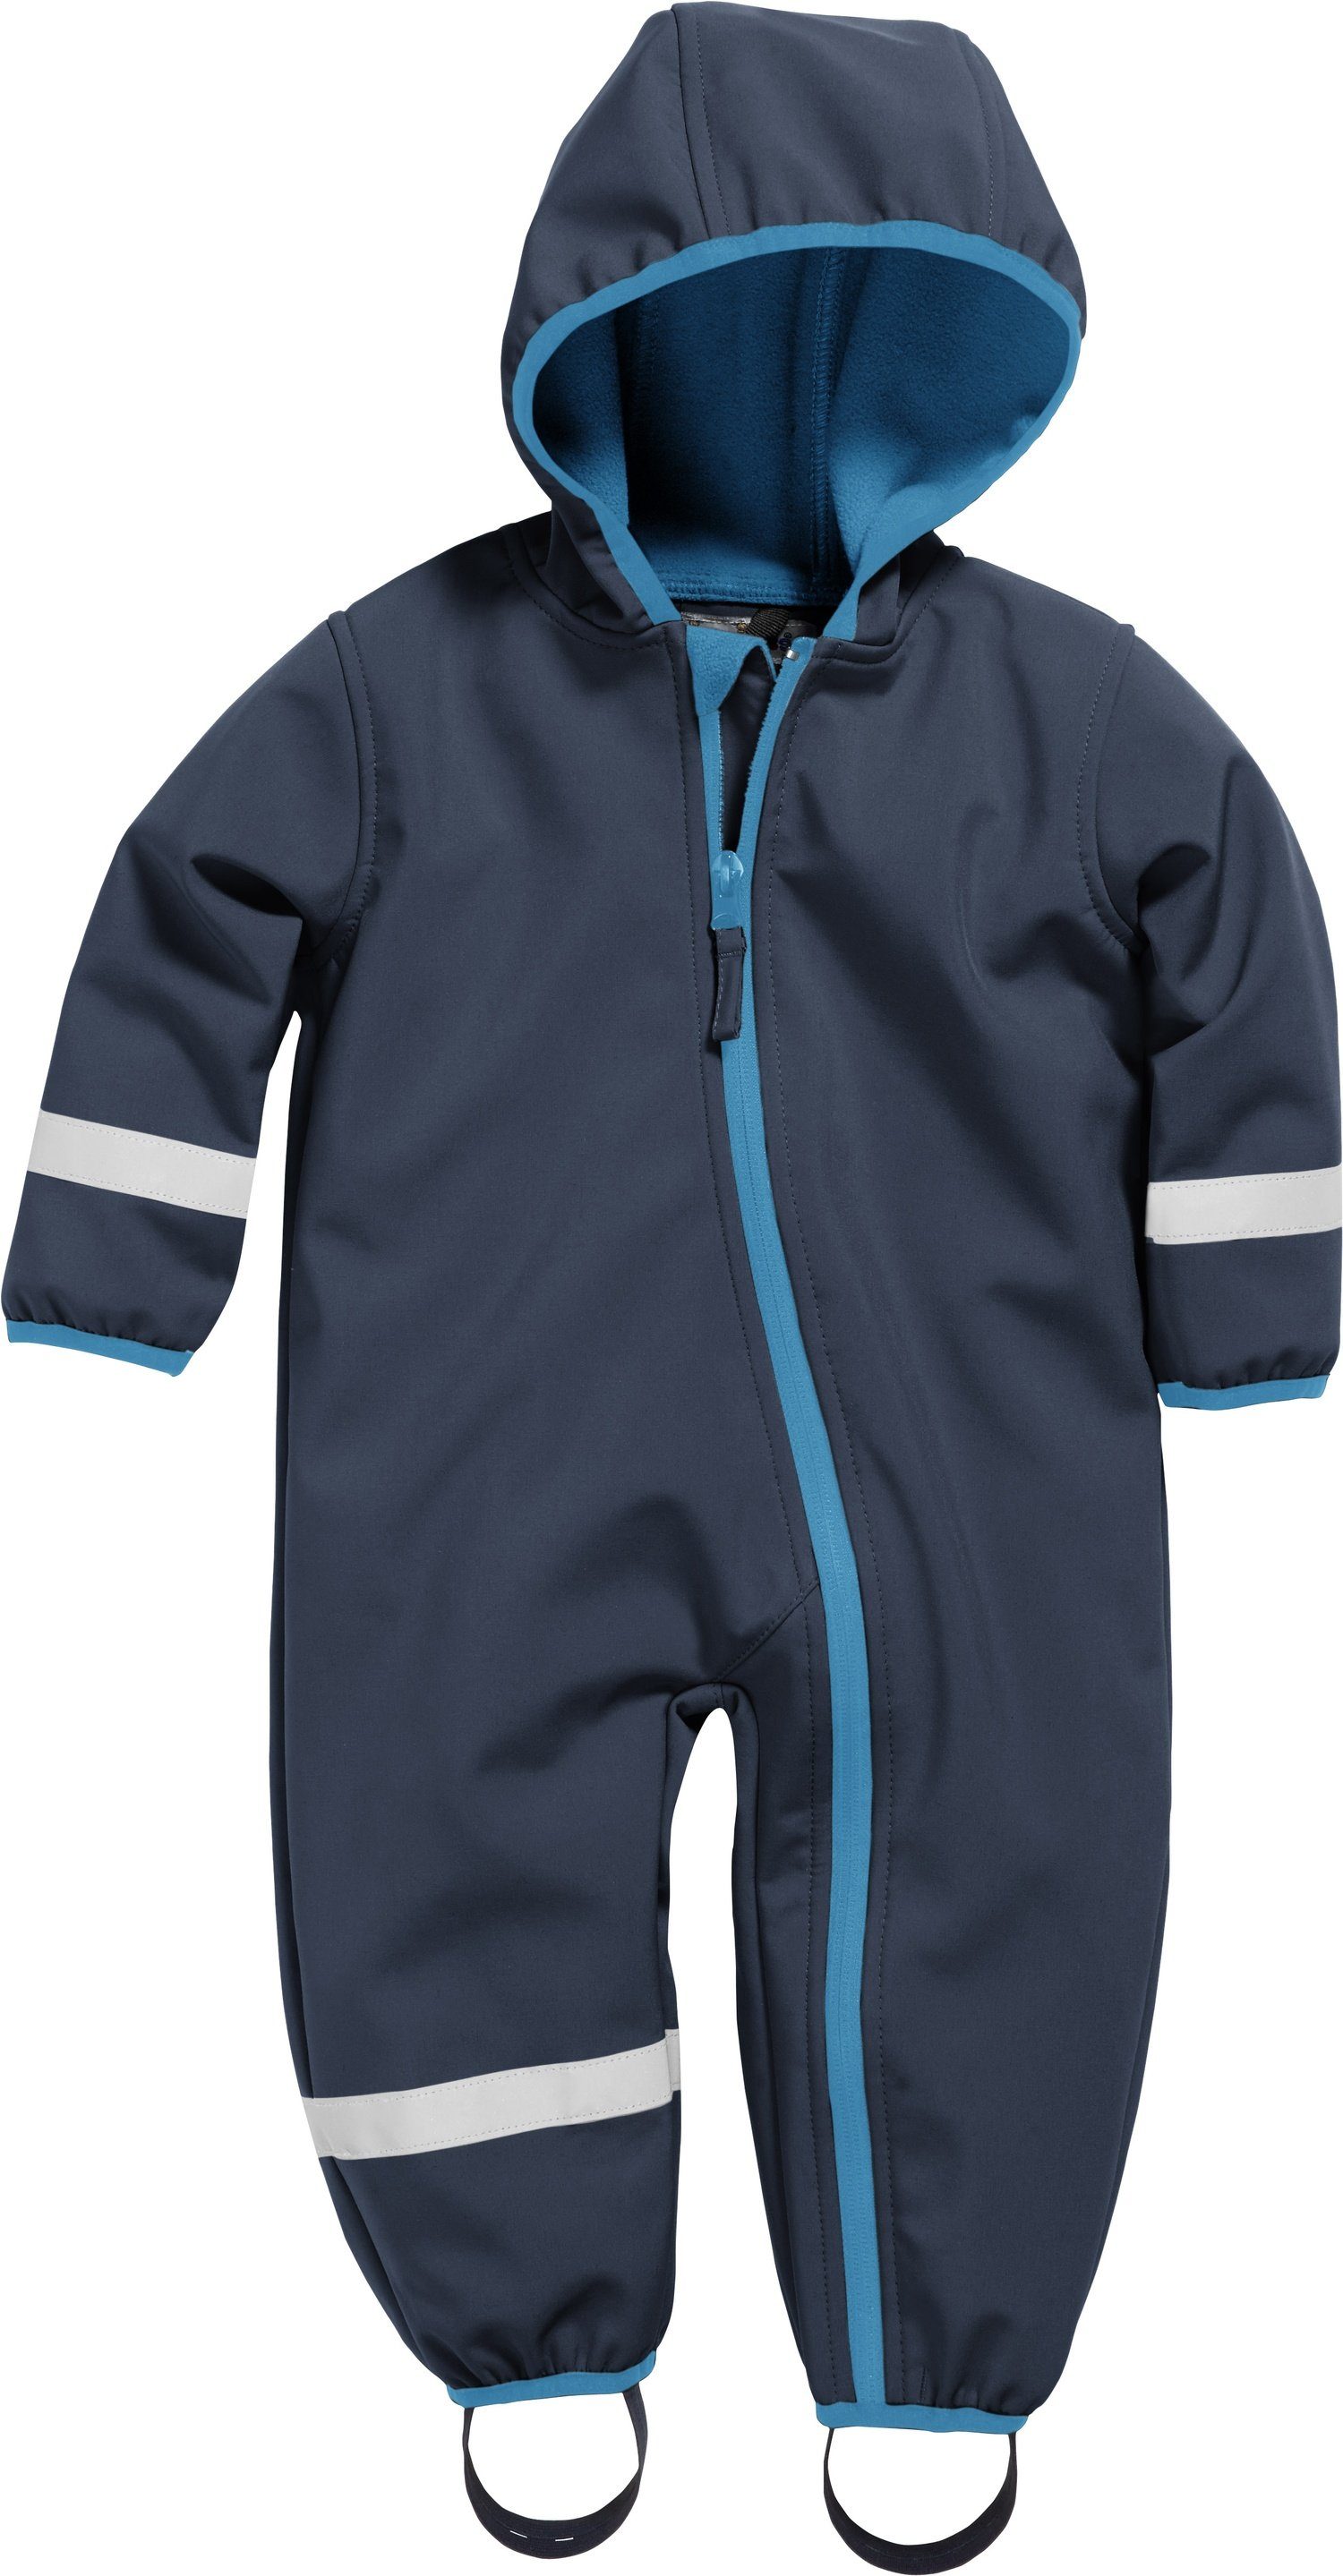 Playshoes Softshelloverall Softshell-Overall